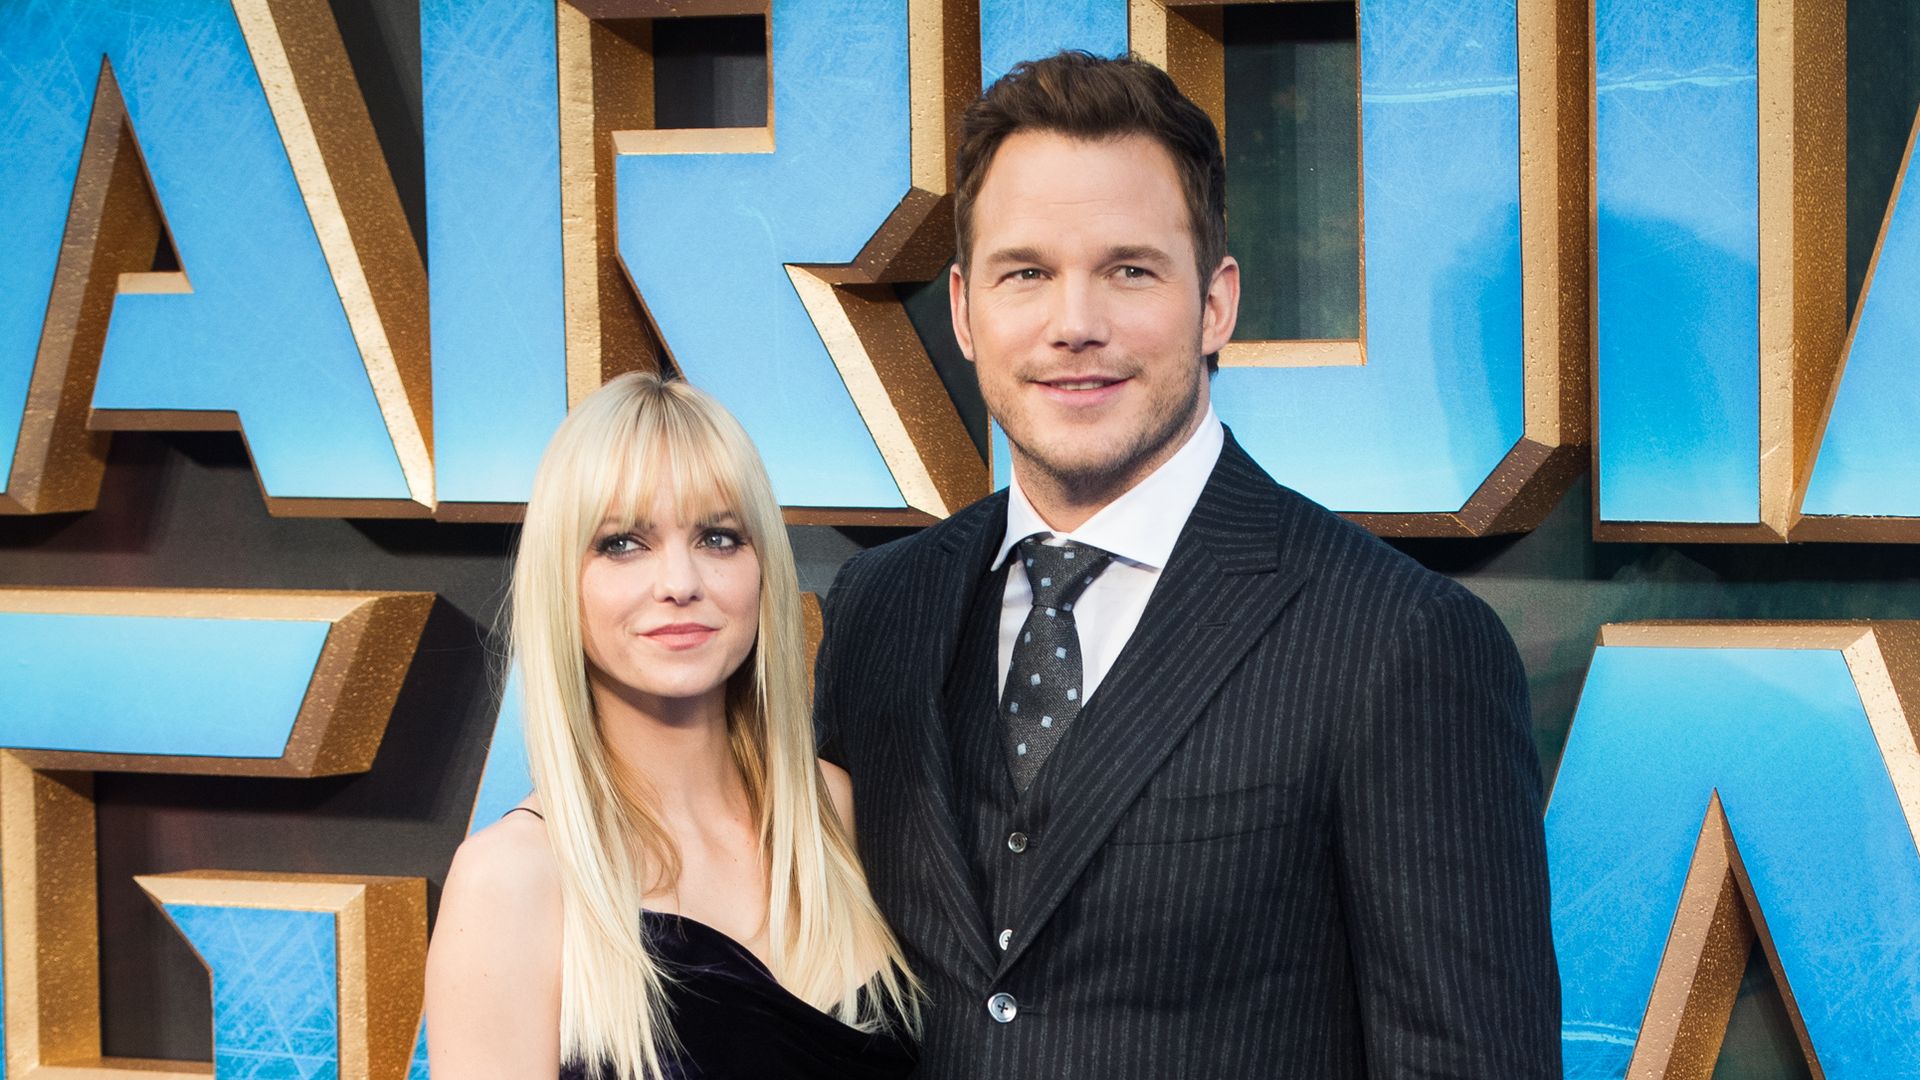 Where does Chris Pratt's relationship with Anna Faris stand after Mother's Day controversy?